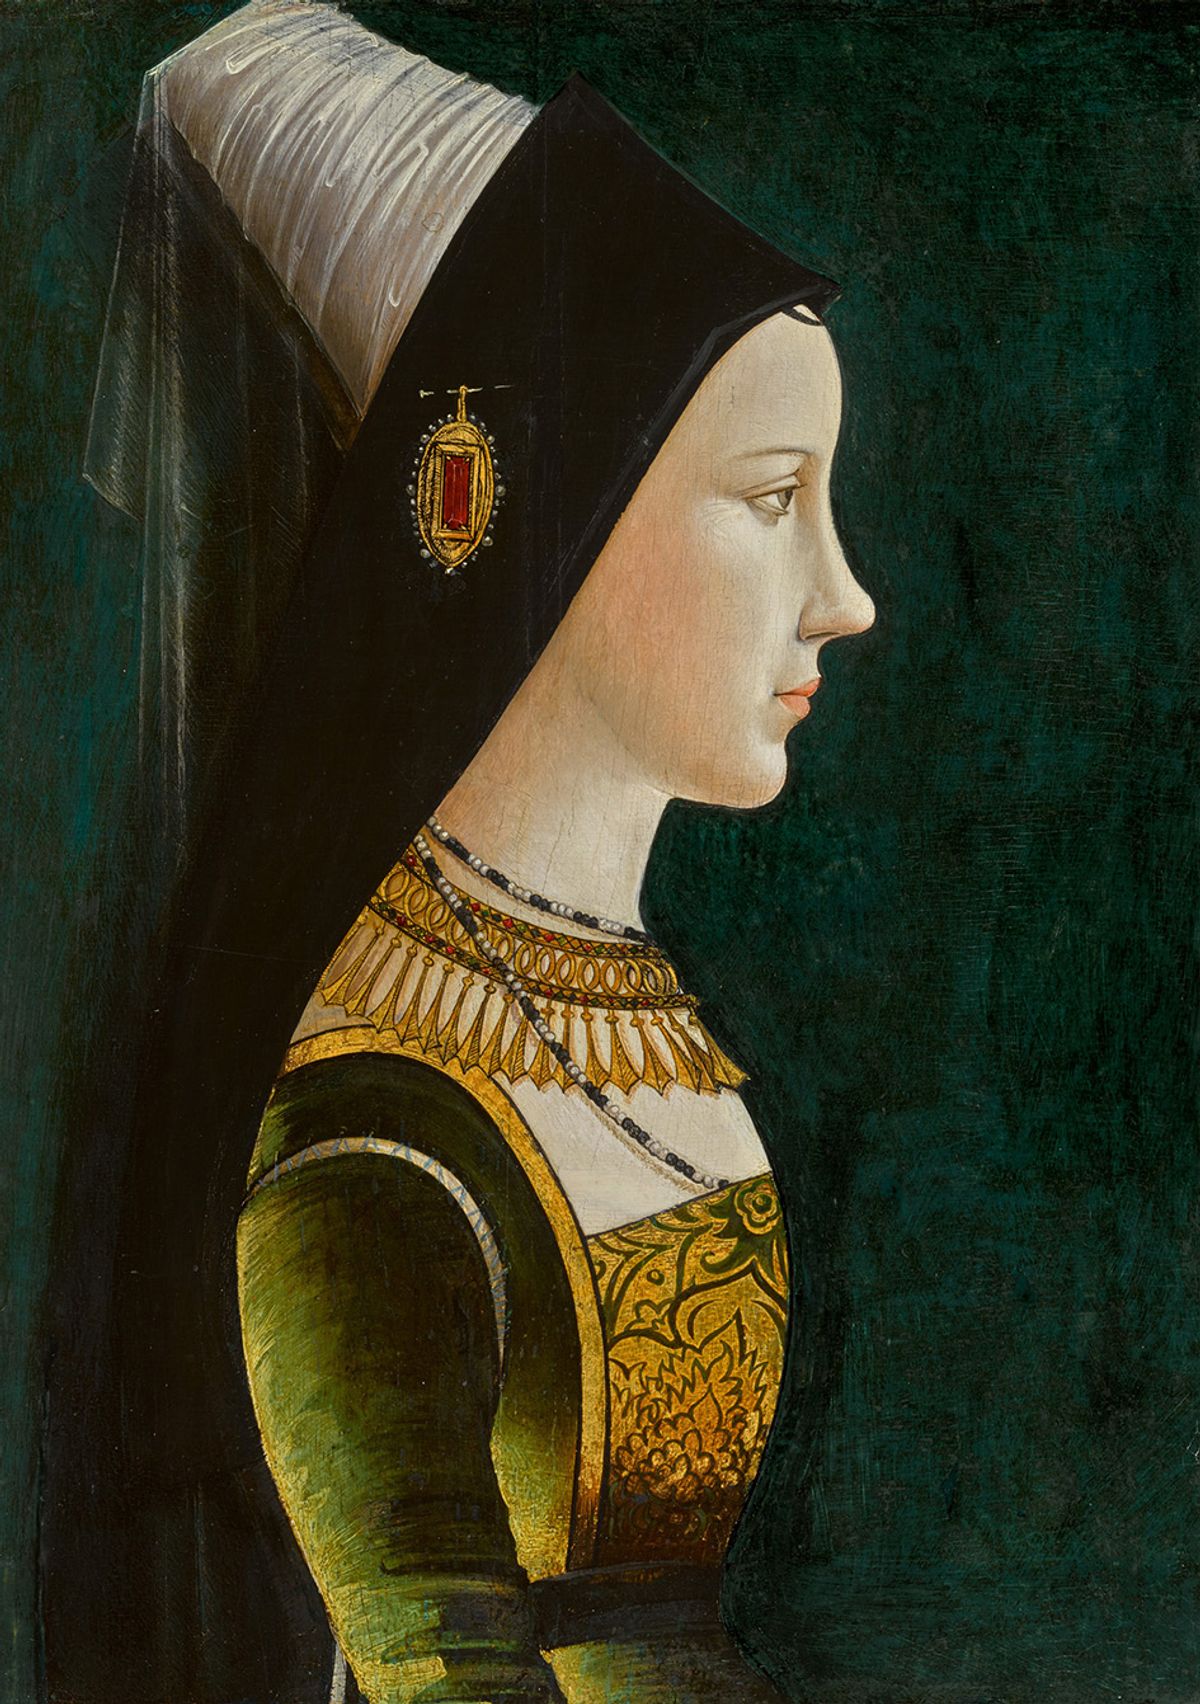 15th century Netherlandish or South German School portrait of Mary of Burgundy, sold for £1.7m (£2m with fees) Sotheby's